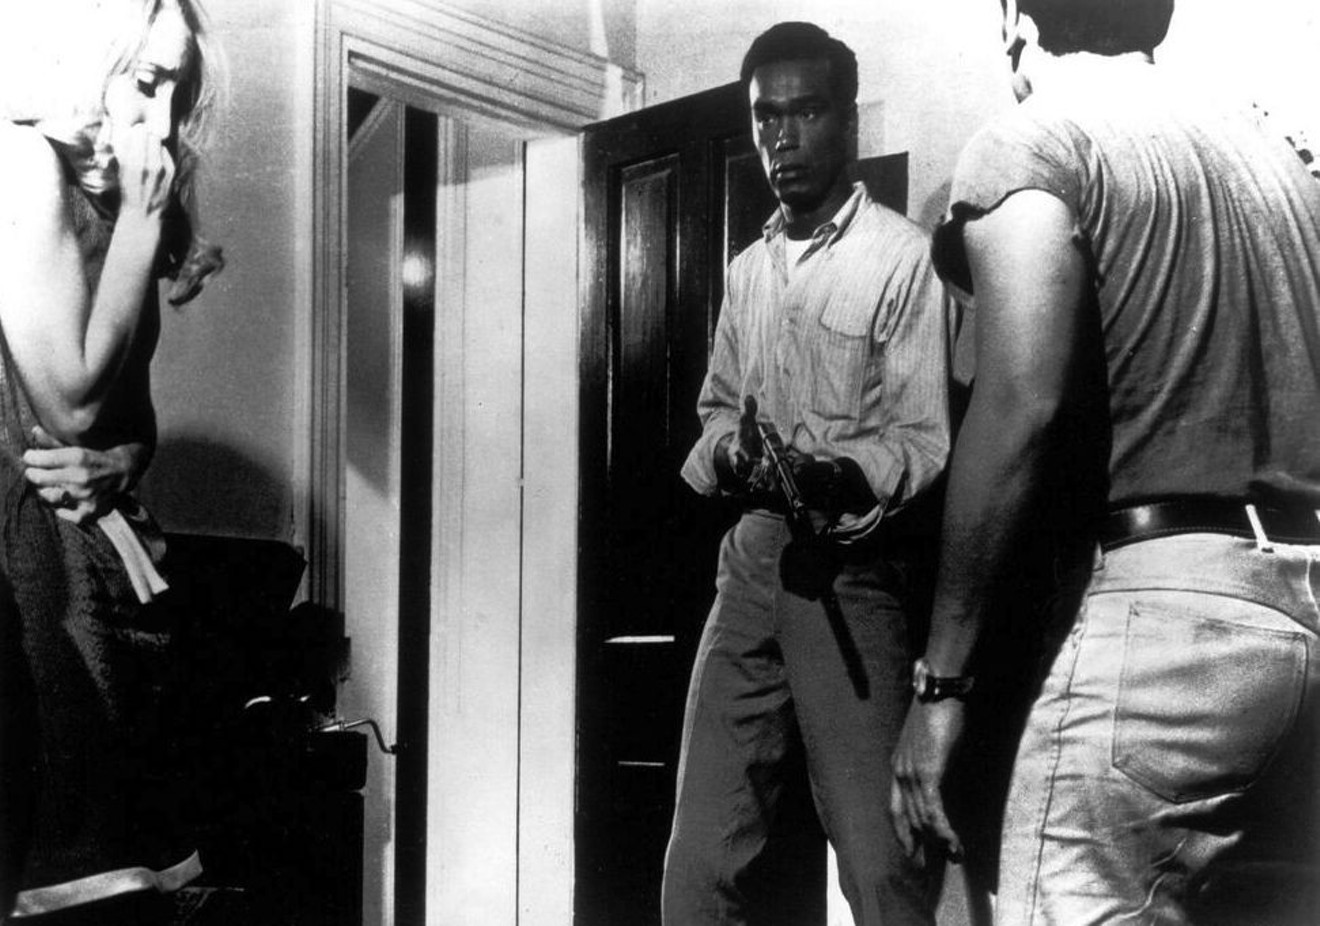 Duane Jones (center) plays Ben and Judith O’Dea (left) is Barbra in Night of the Living Dead. Released in 1968, George Romero's shocker was much more than a low-budget horror movie  — because it all seemed just a little too real.